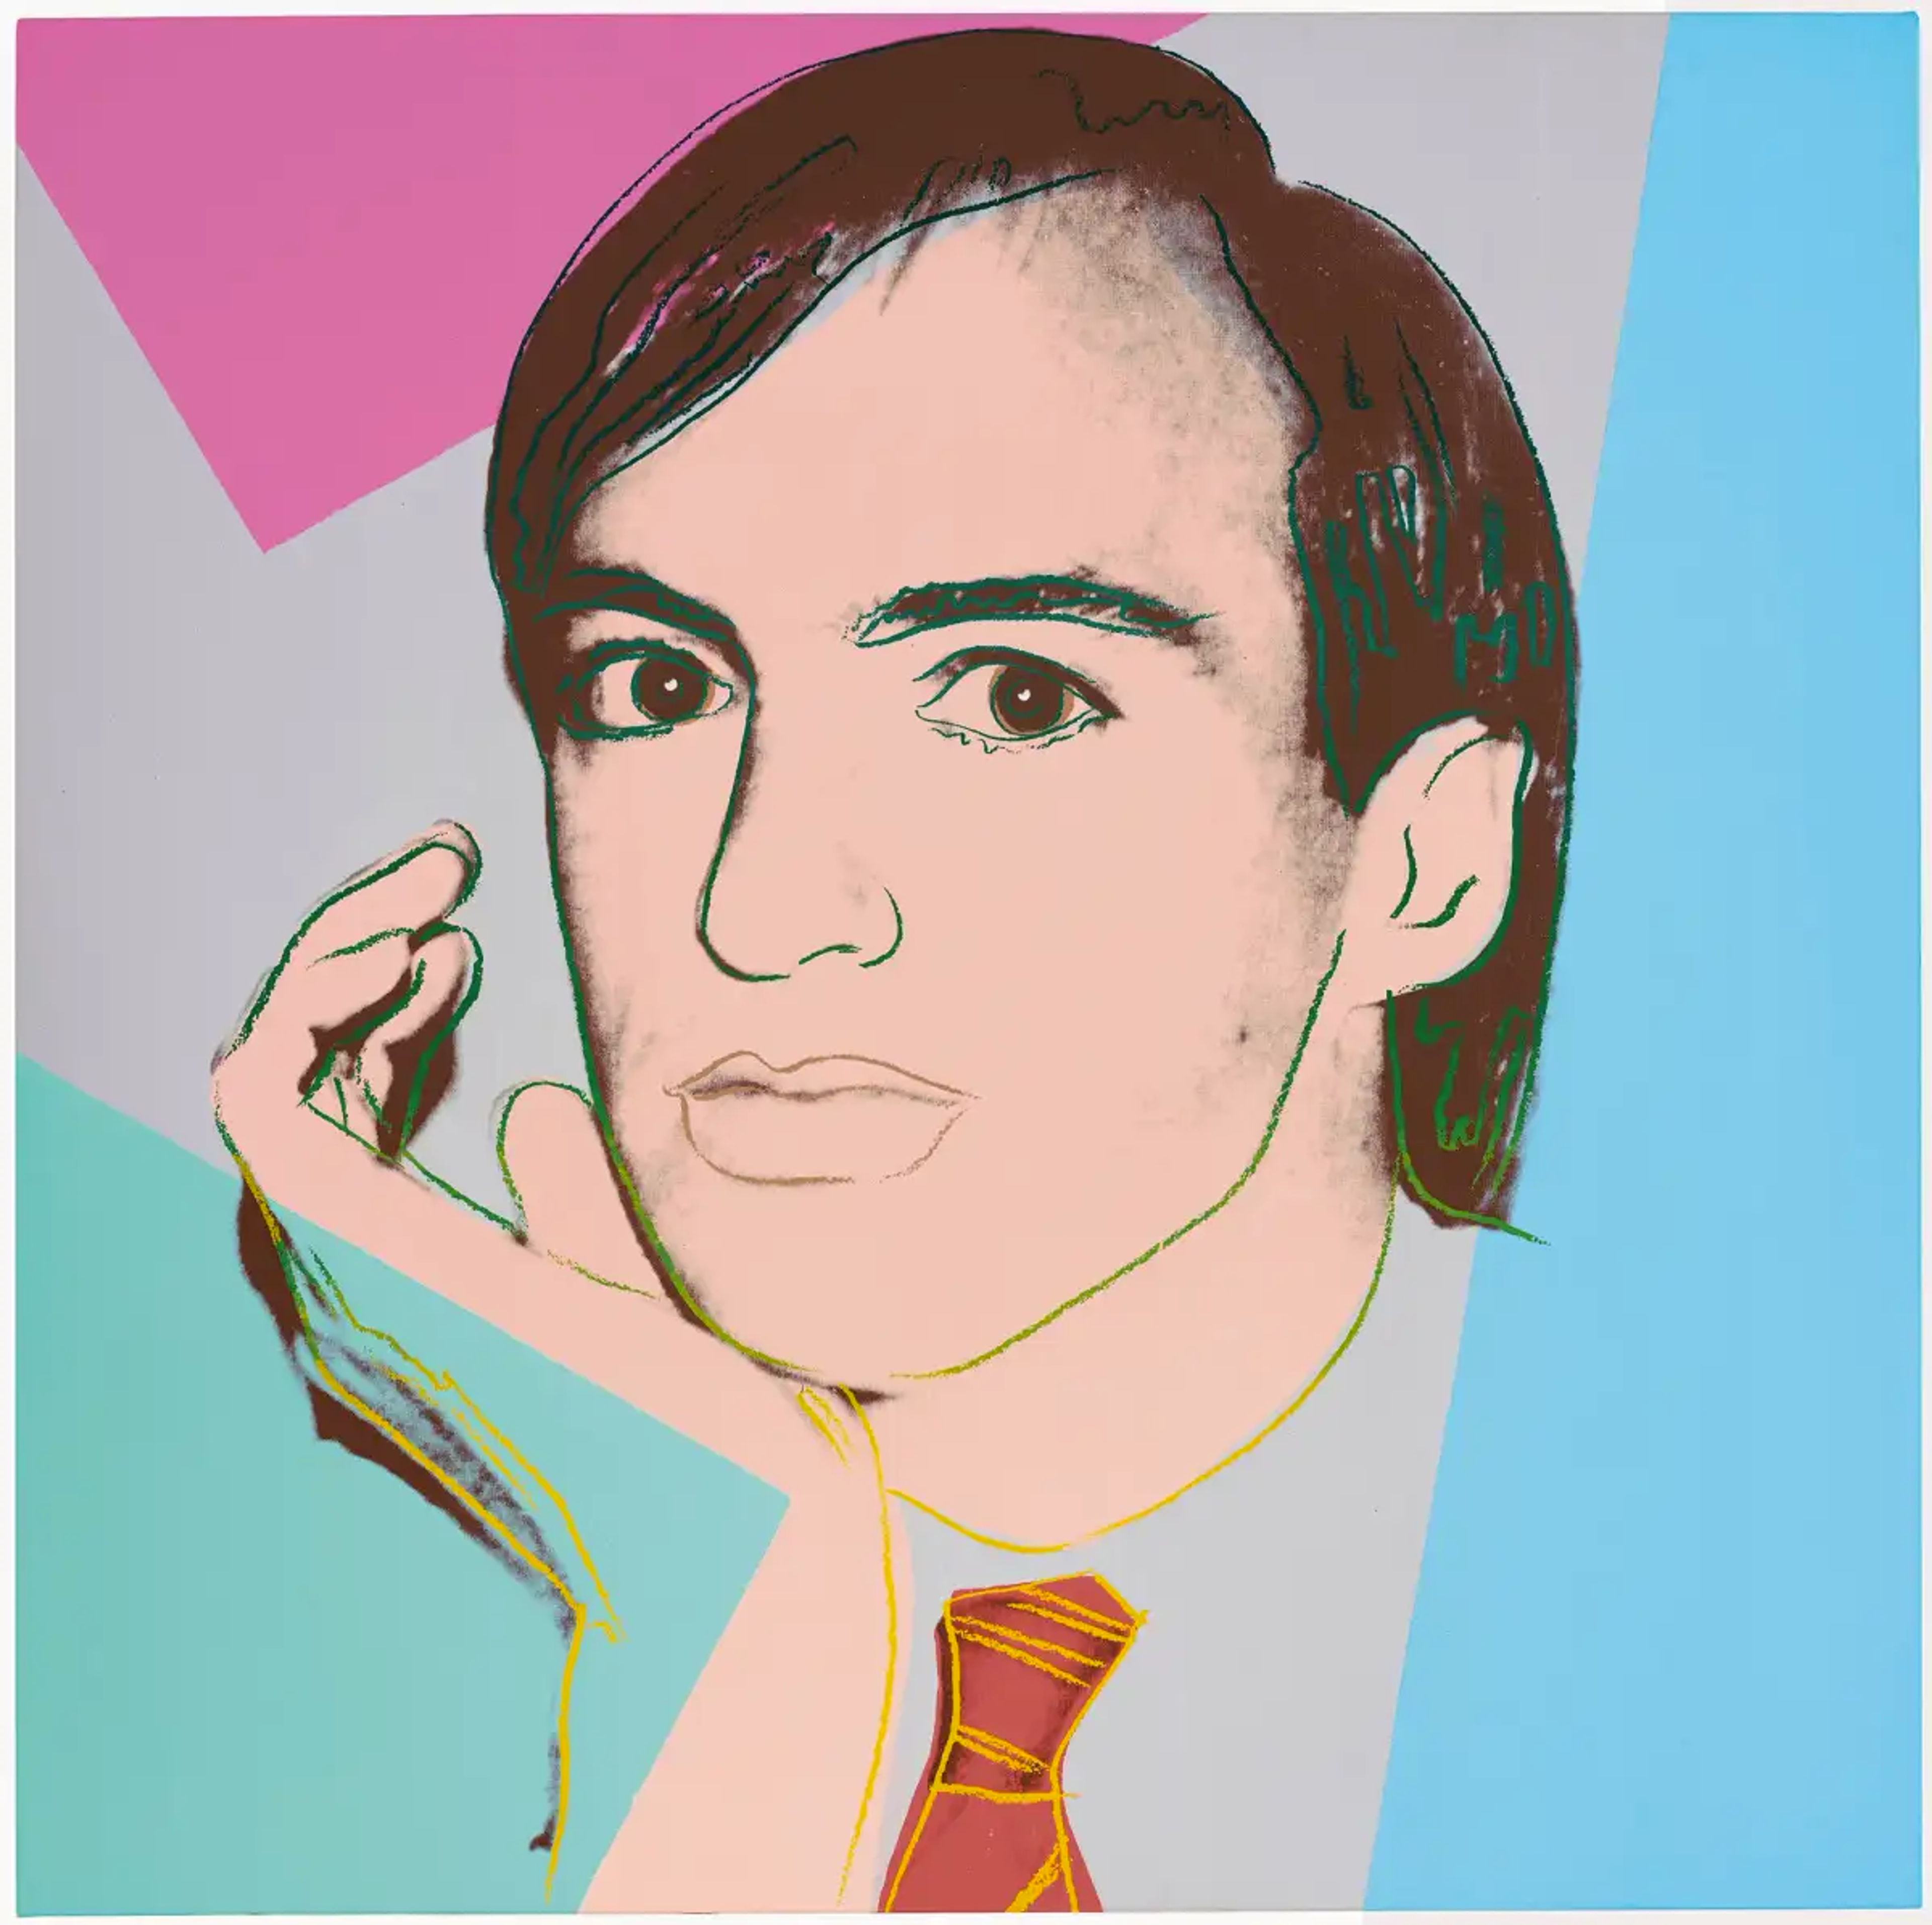 A Pop Art style portrait of executive Jon Gould, done by Andy Warhol. He is shown in bright colours, with his face in his hand while wearing a tie.